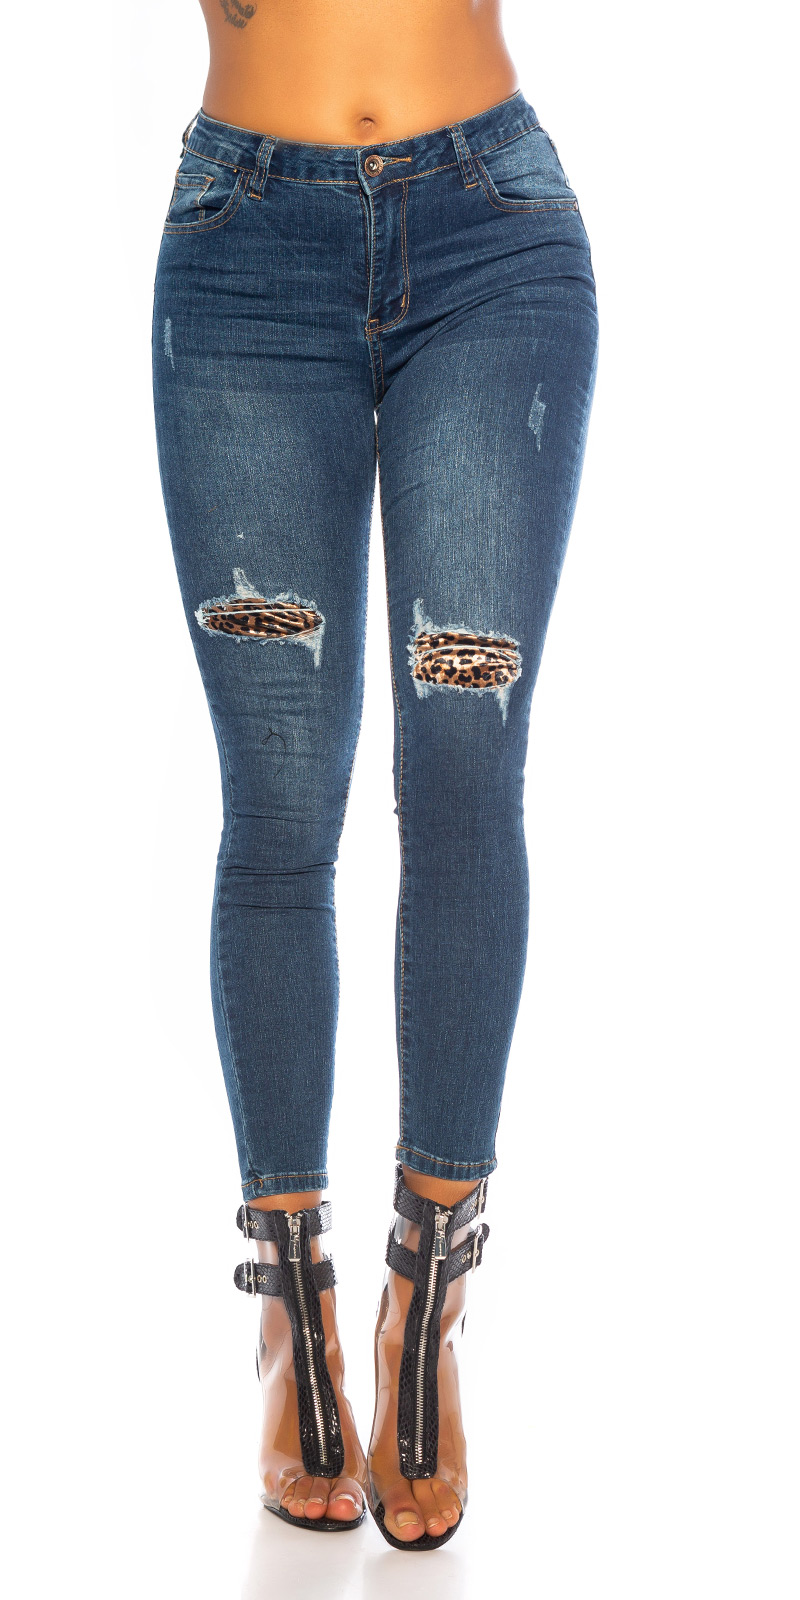 Used look Skinny Drainpipe Jeans With Leo holes | eBay